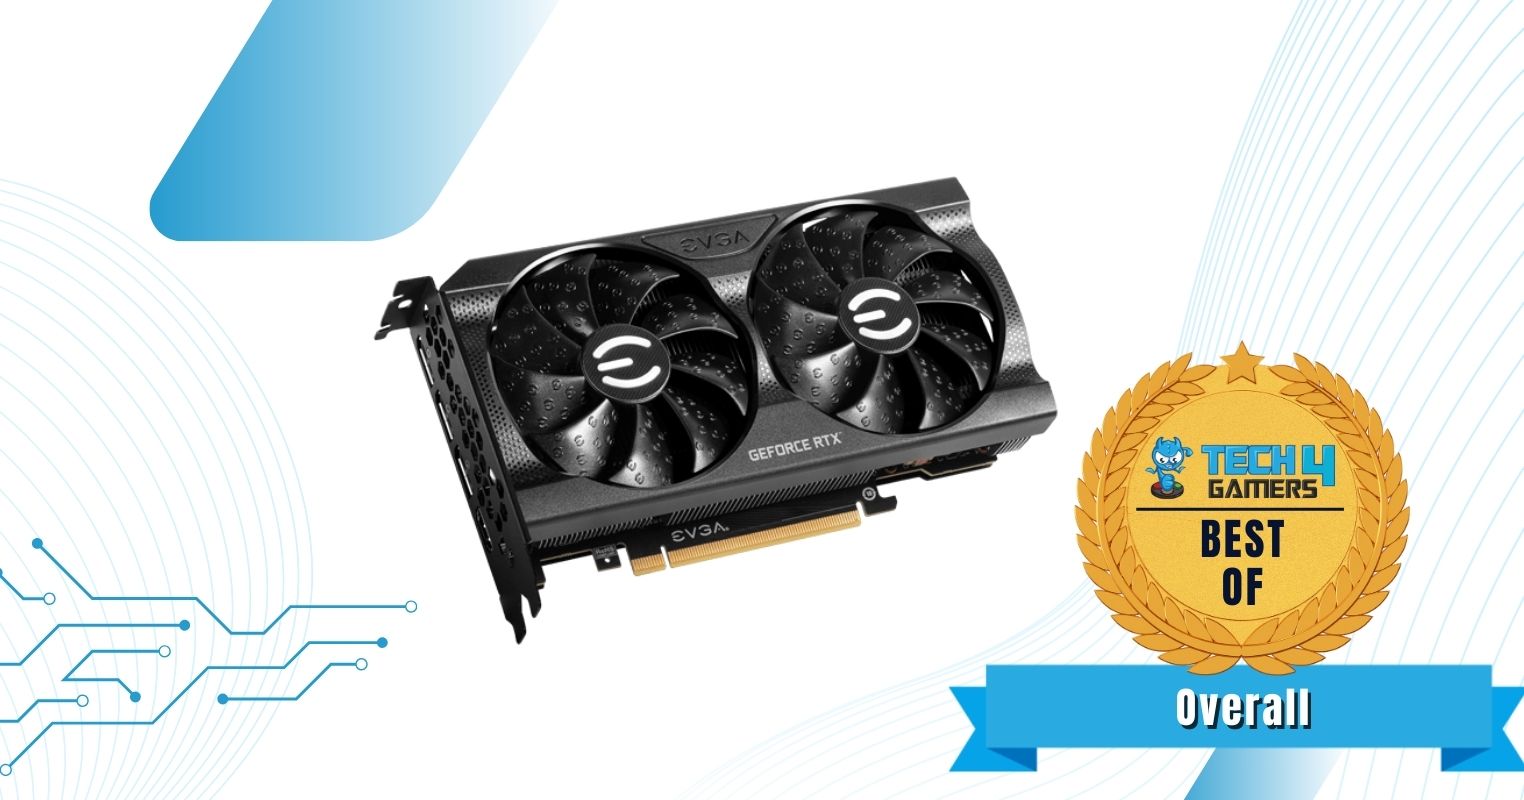 Best Overall RTX 3050 Graphics Card - EVGA GeForce RTX 3050 XC Gaming